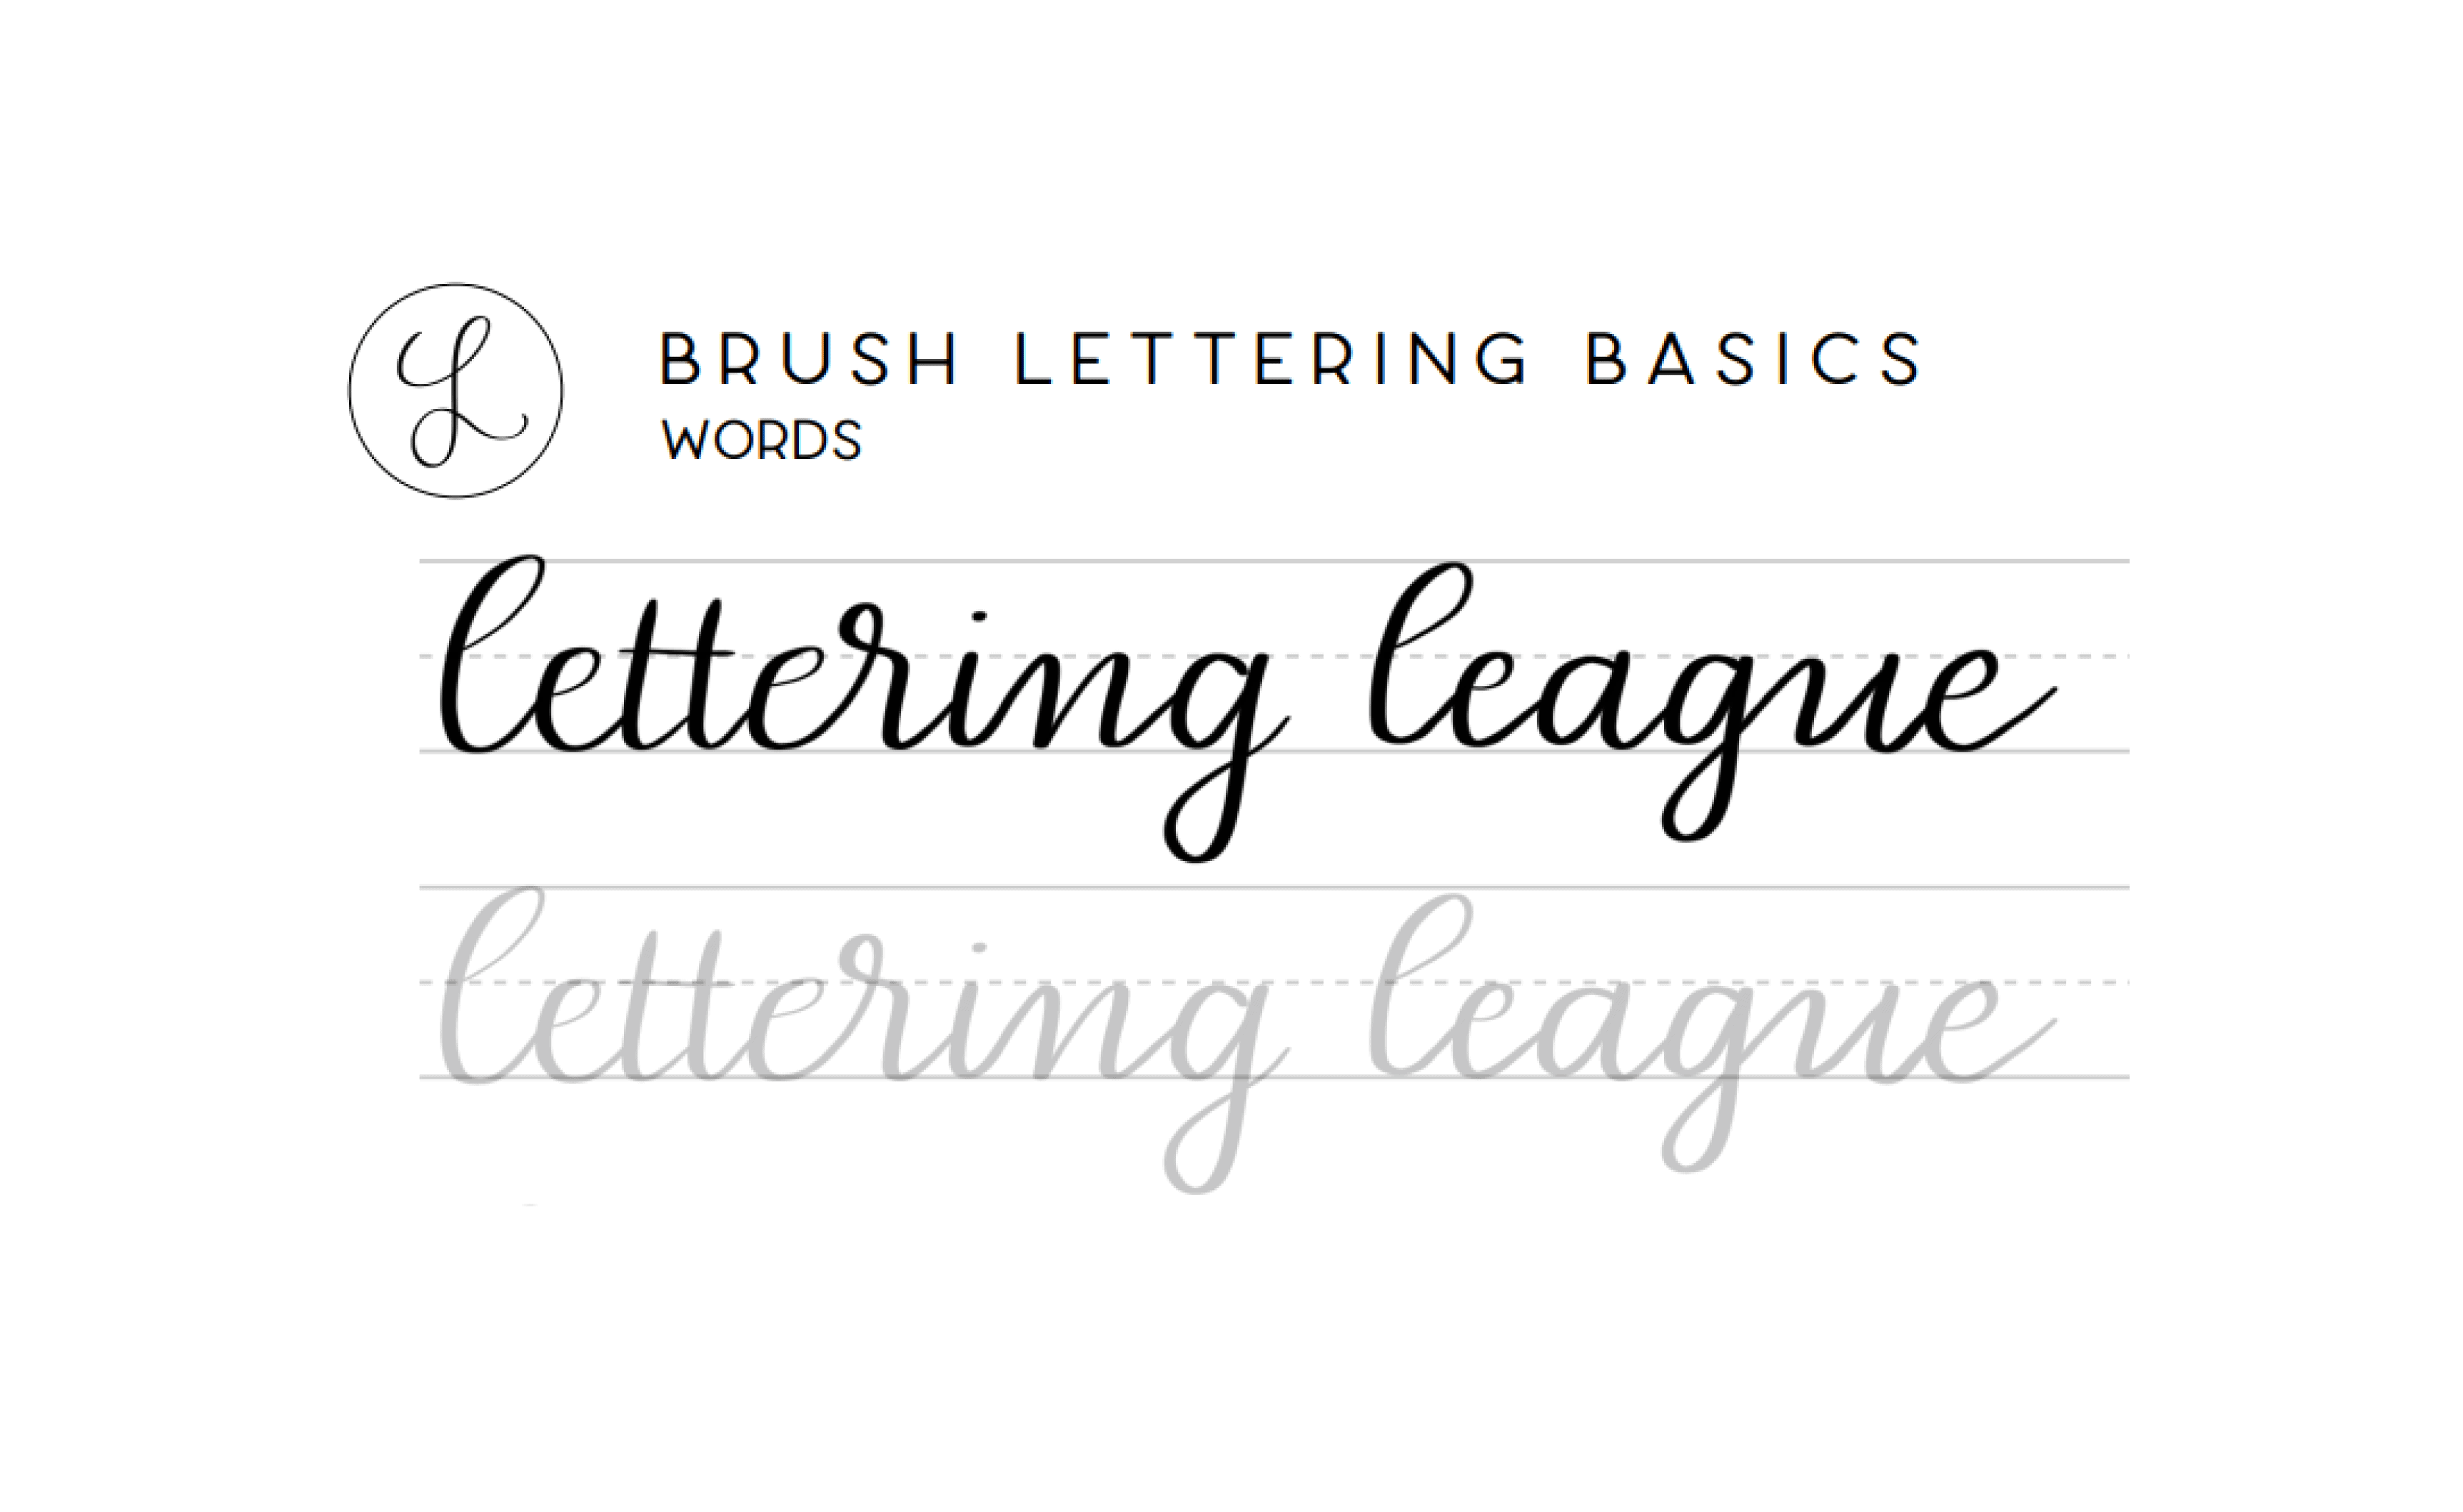 Let's Get Started Calligraphy and Hand Lettering Workbook for Beginners